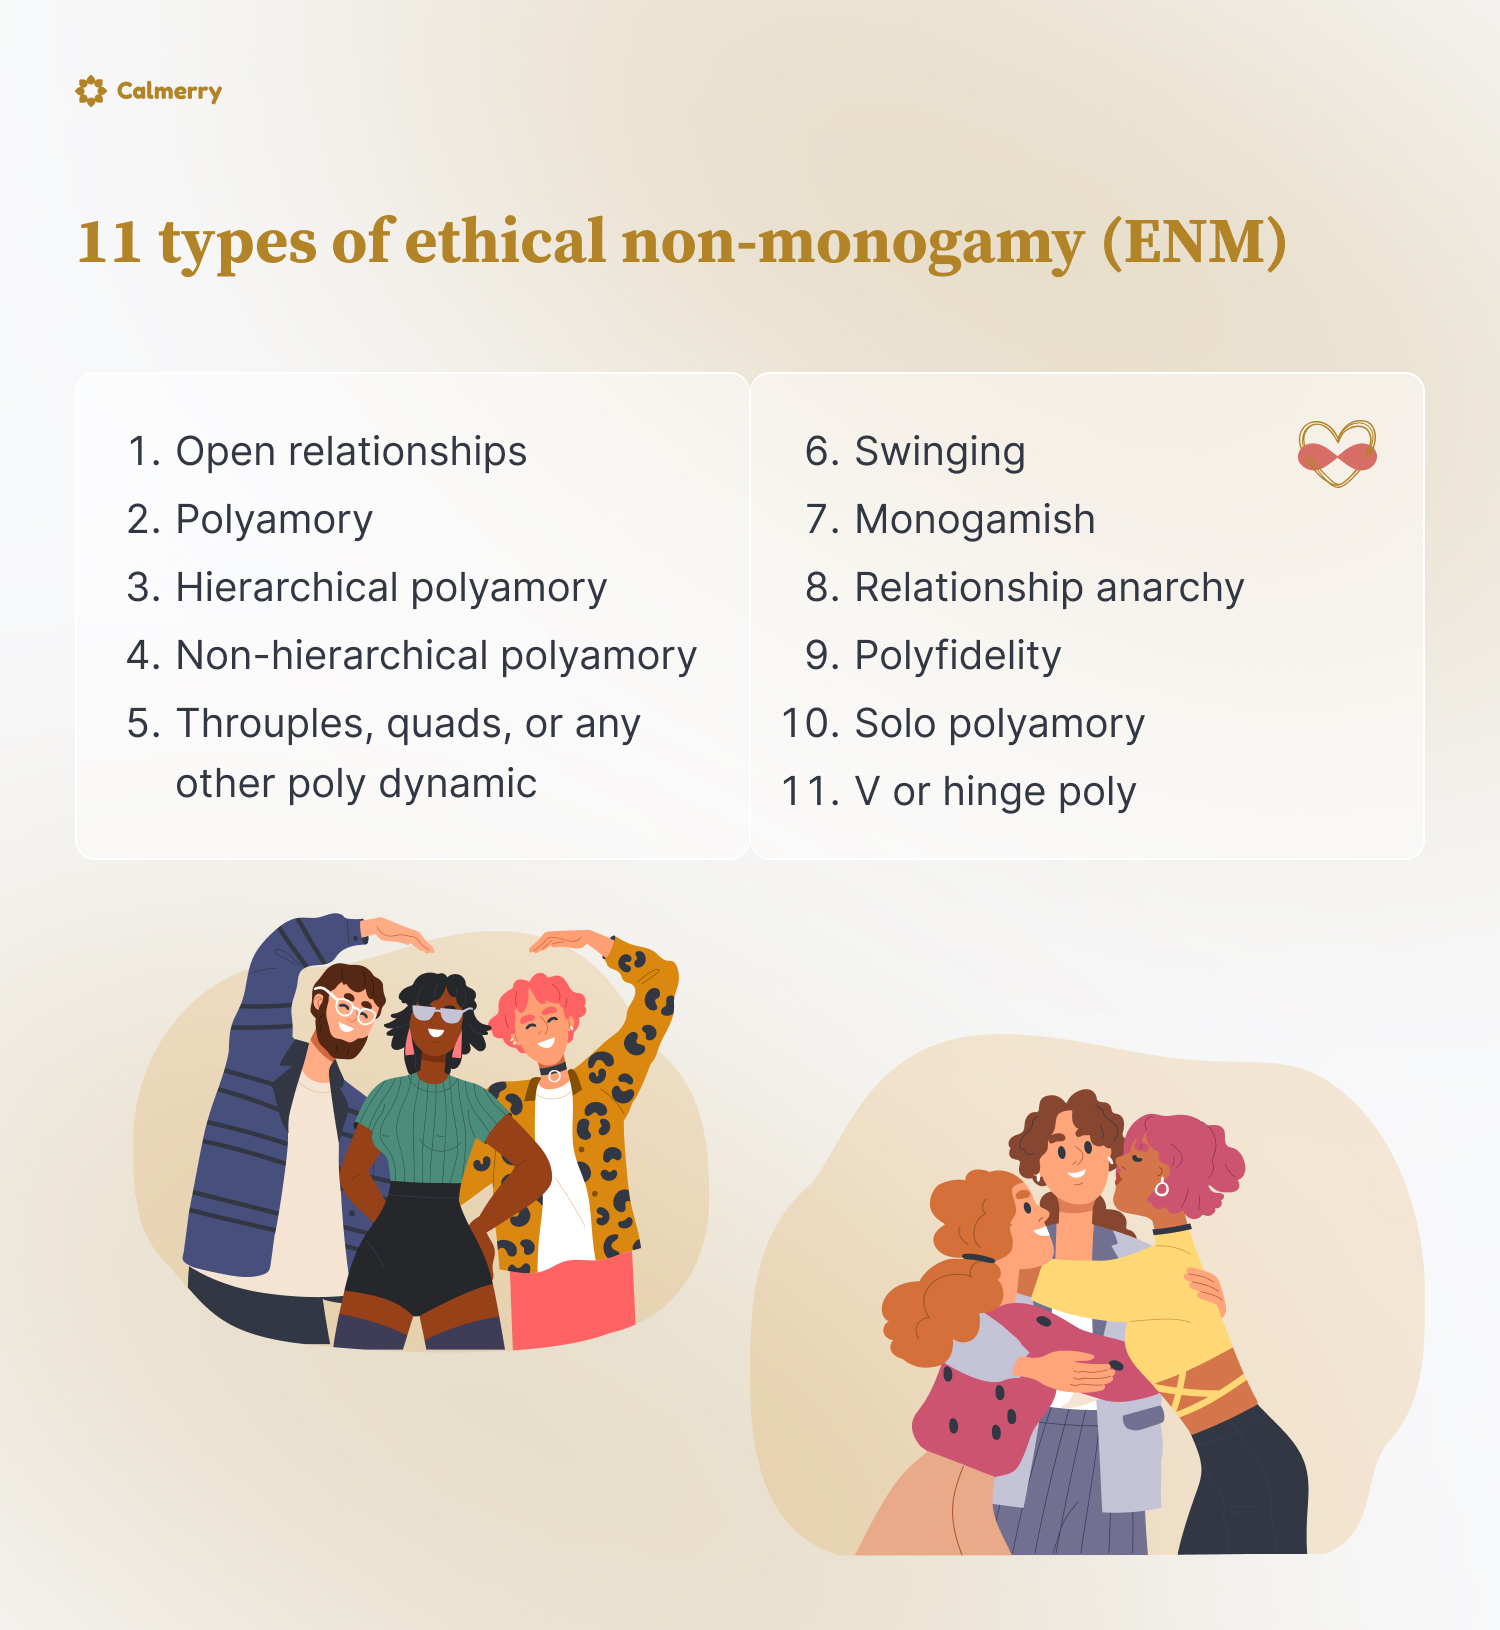 11 types of ethical non-monogamy (ENM)
1. Open relationships
2. Polyamory
3. Hierarchical polyamory
4. Non-hierarchical polyamory
5. Throuples, quads, or any other poly dynamic
6. Swinging
7. Monogamish
8. Relationship anarchy
9. Polyfidelity
10. Solo polyamory
11. V or hinge poly